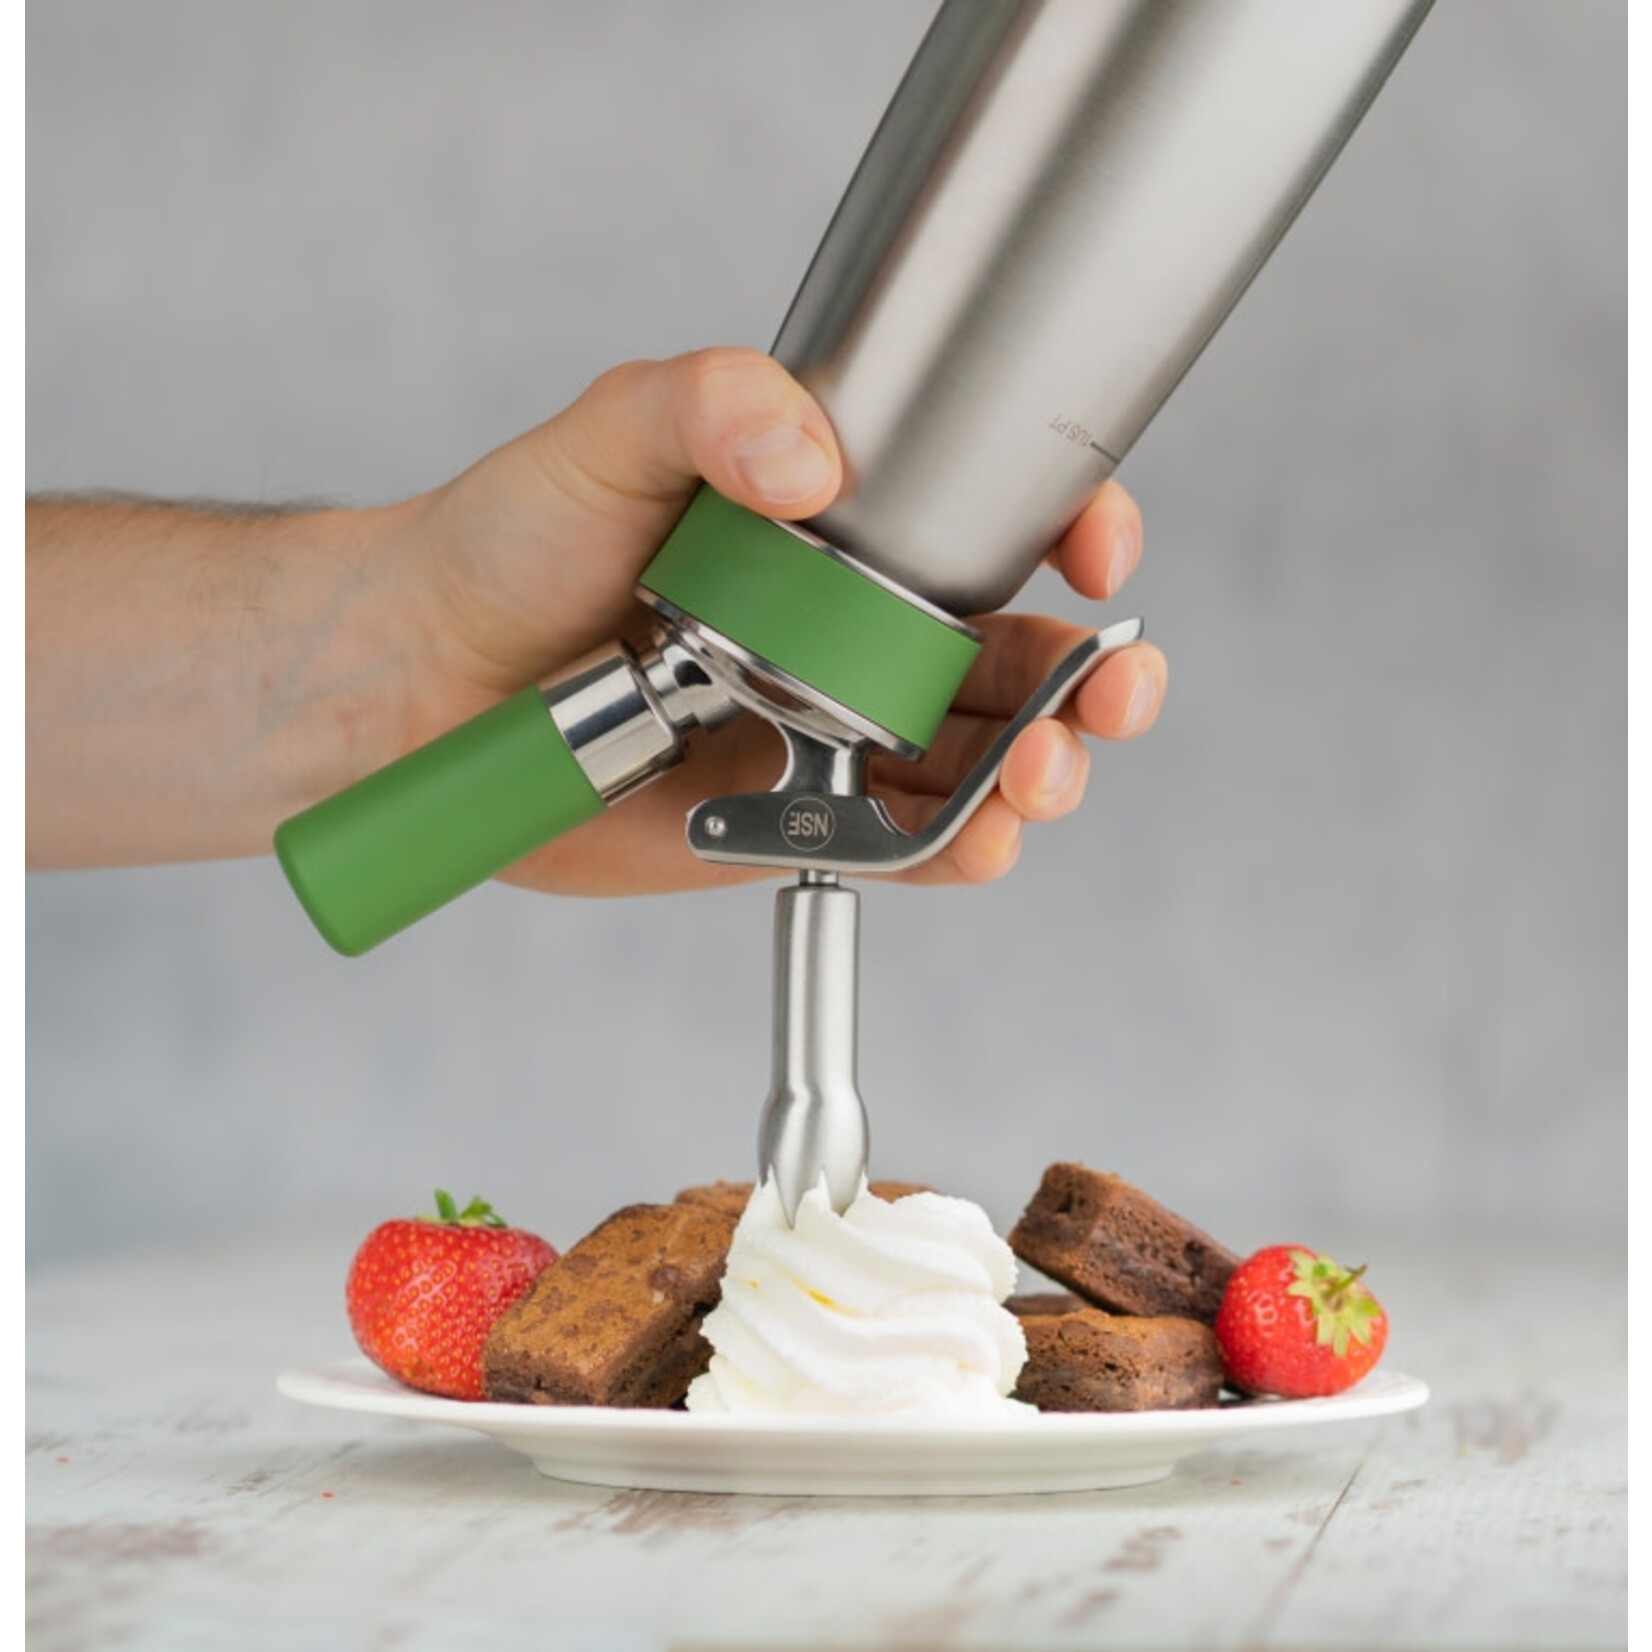 iSi Culinary Whip 500 ml 100 % klimaat neutrale iSi Green Whip iSi Green Whip 500 ml  iSi 0.5 liter iSi 1661